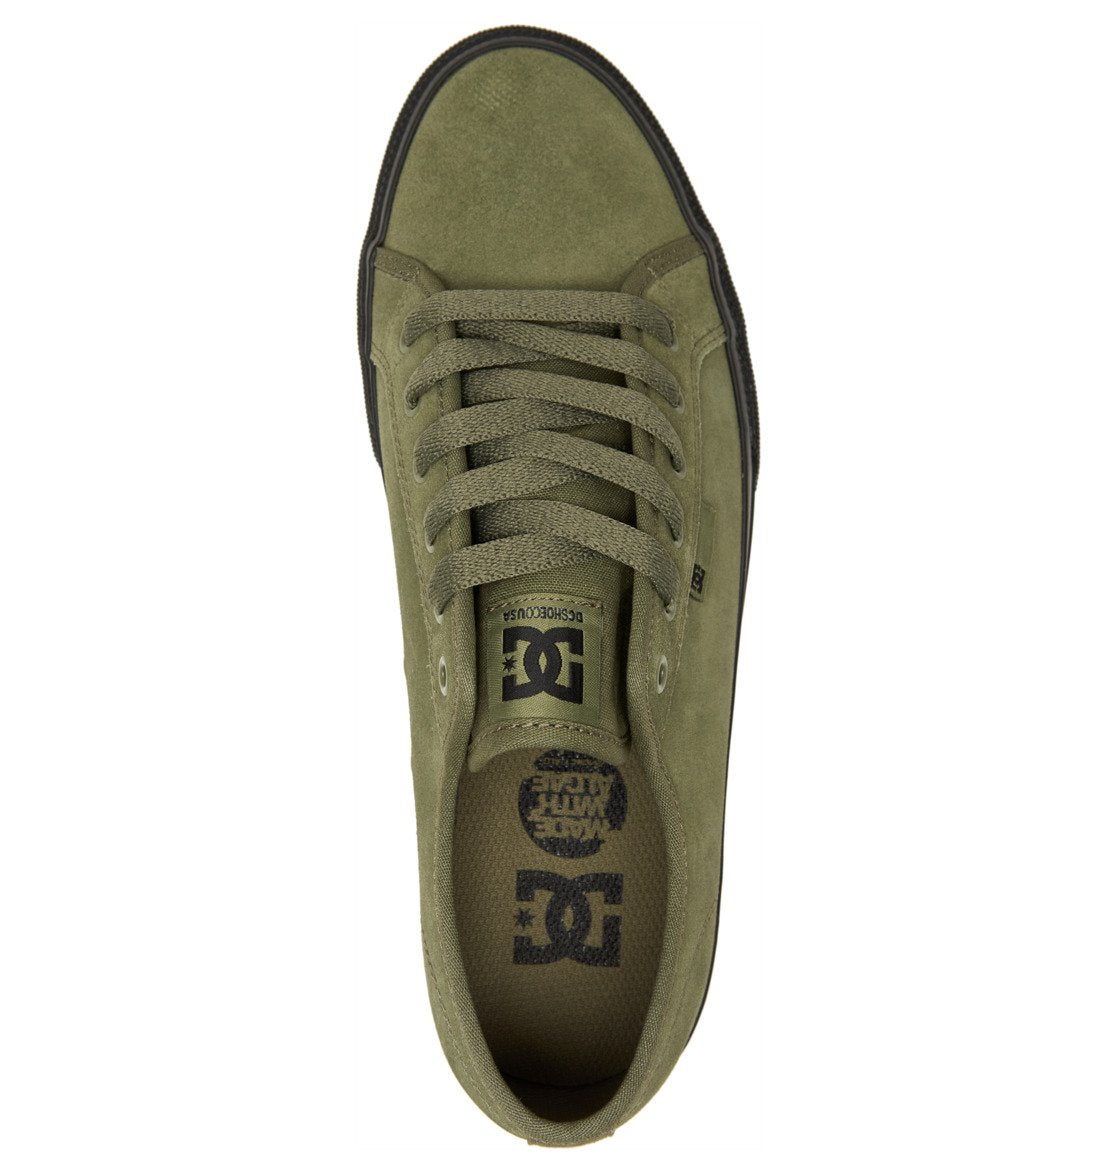 DC Shoes Men's Women's Manual Low Top Skateboarding Shoes Black Olive Top Made with Algae 